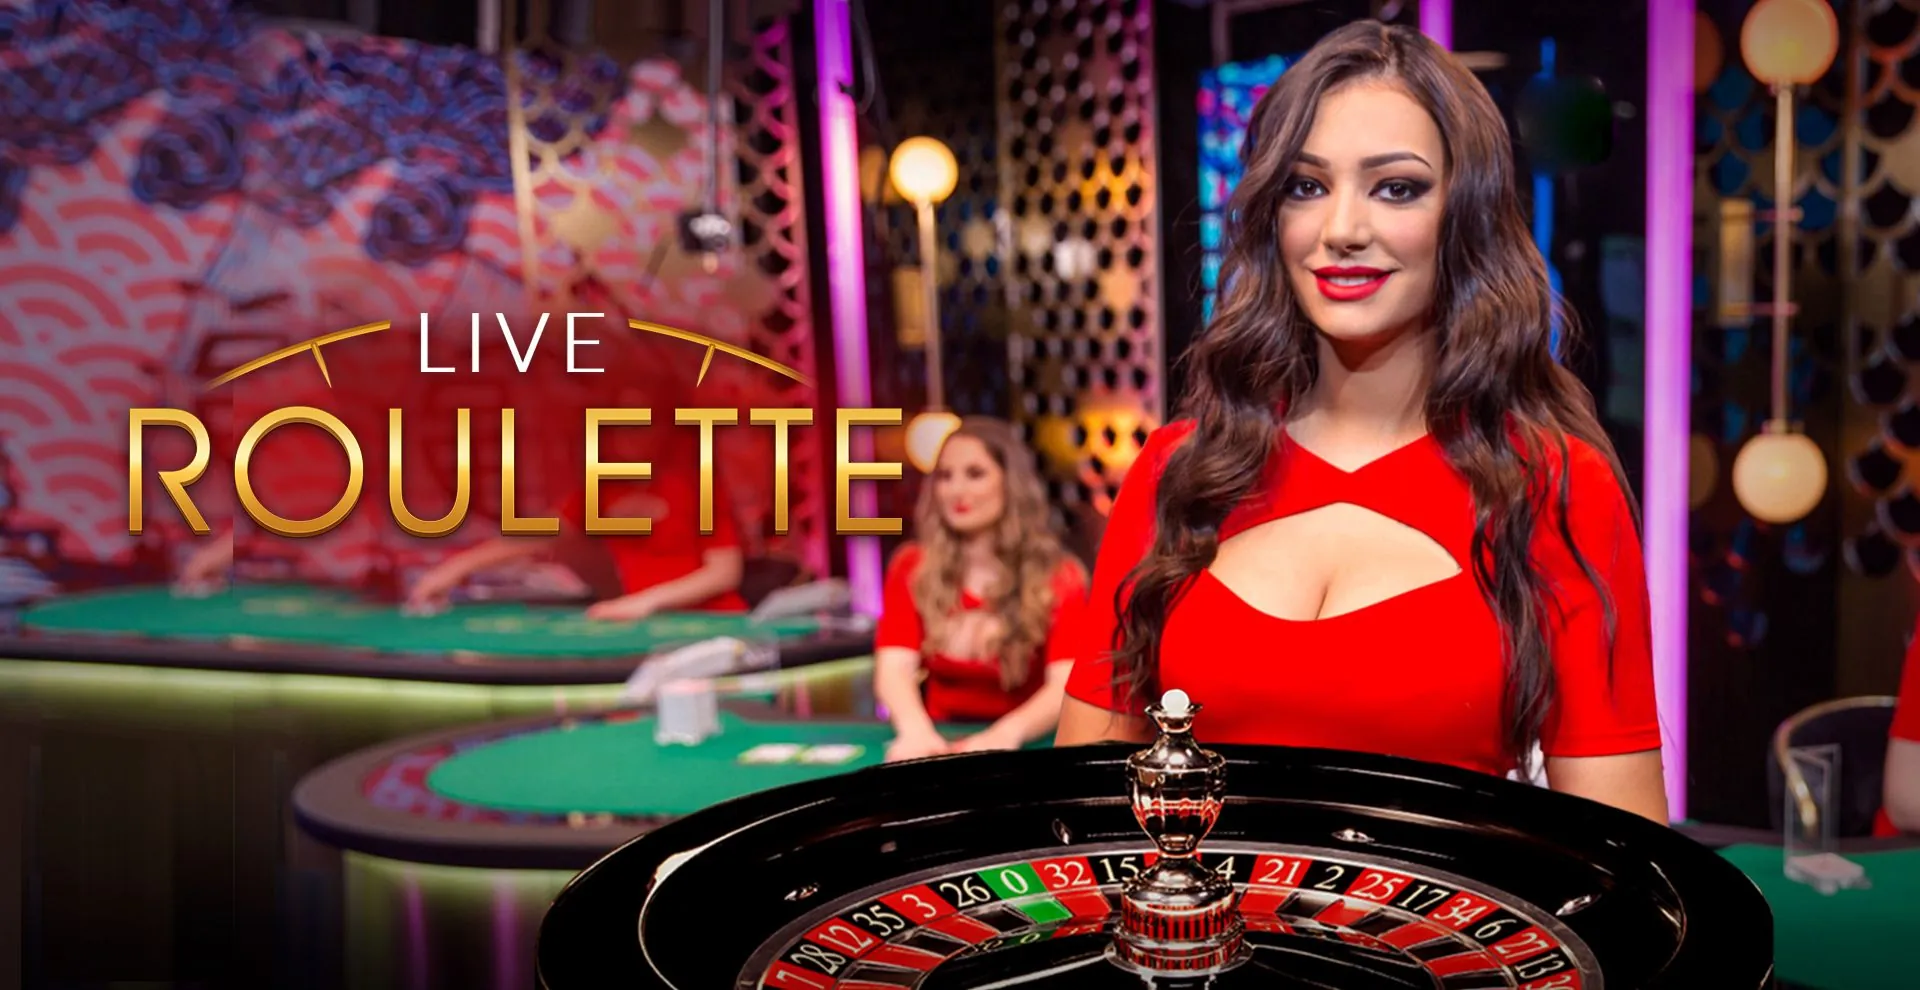 Live Roulette | Demo Free Play | SkywindGroup Holdings LTD